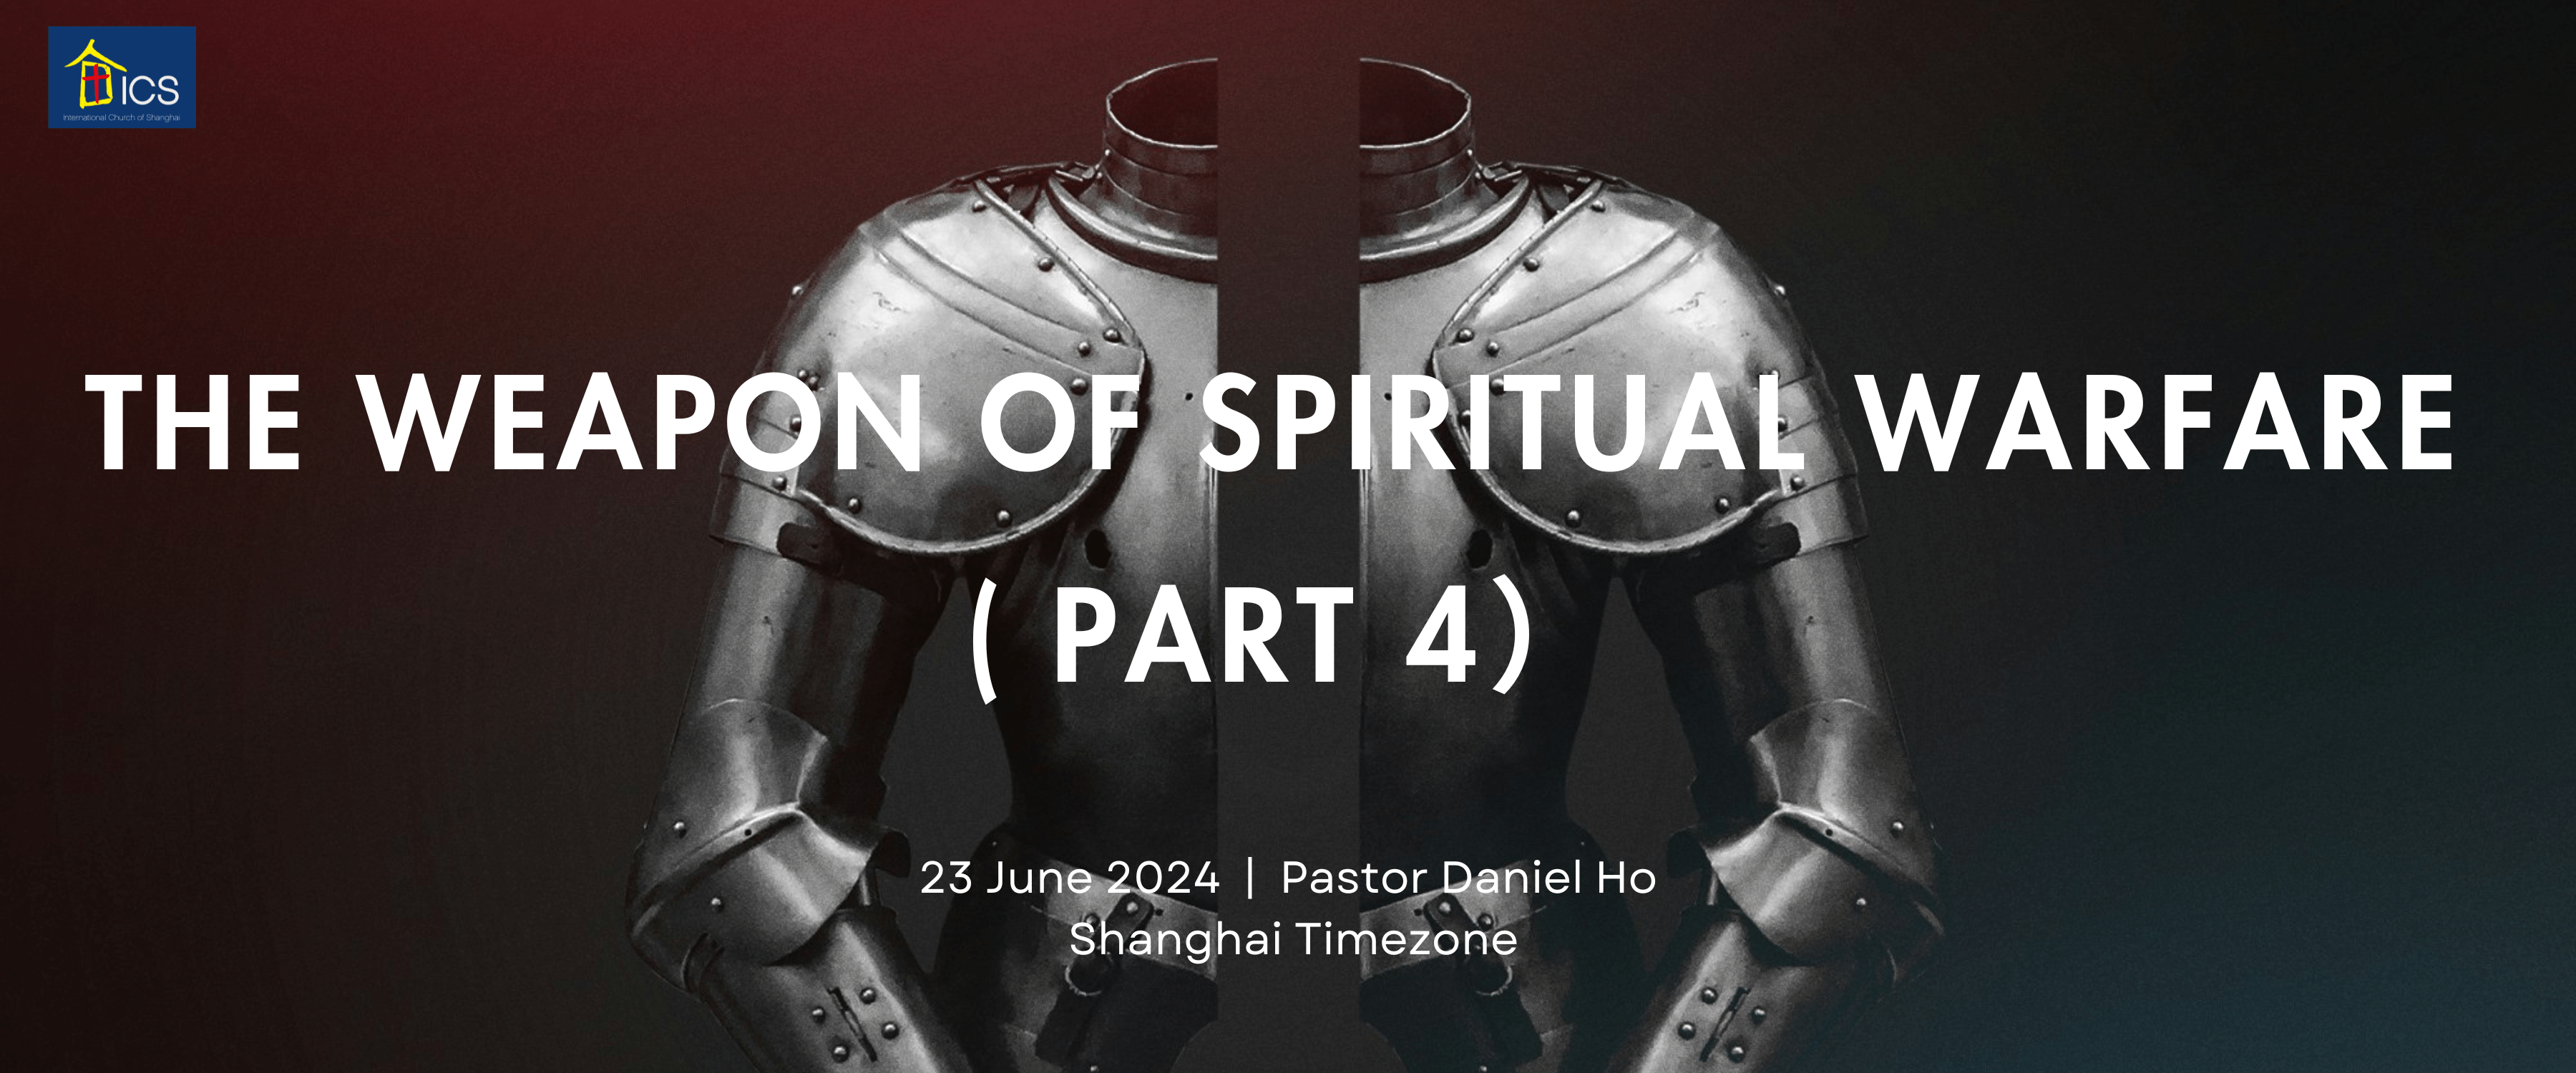 THE WEAPON OF OUR SPIRITUAL WARFARE (PART 4)